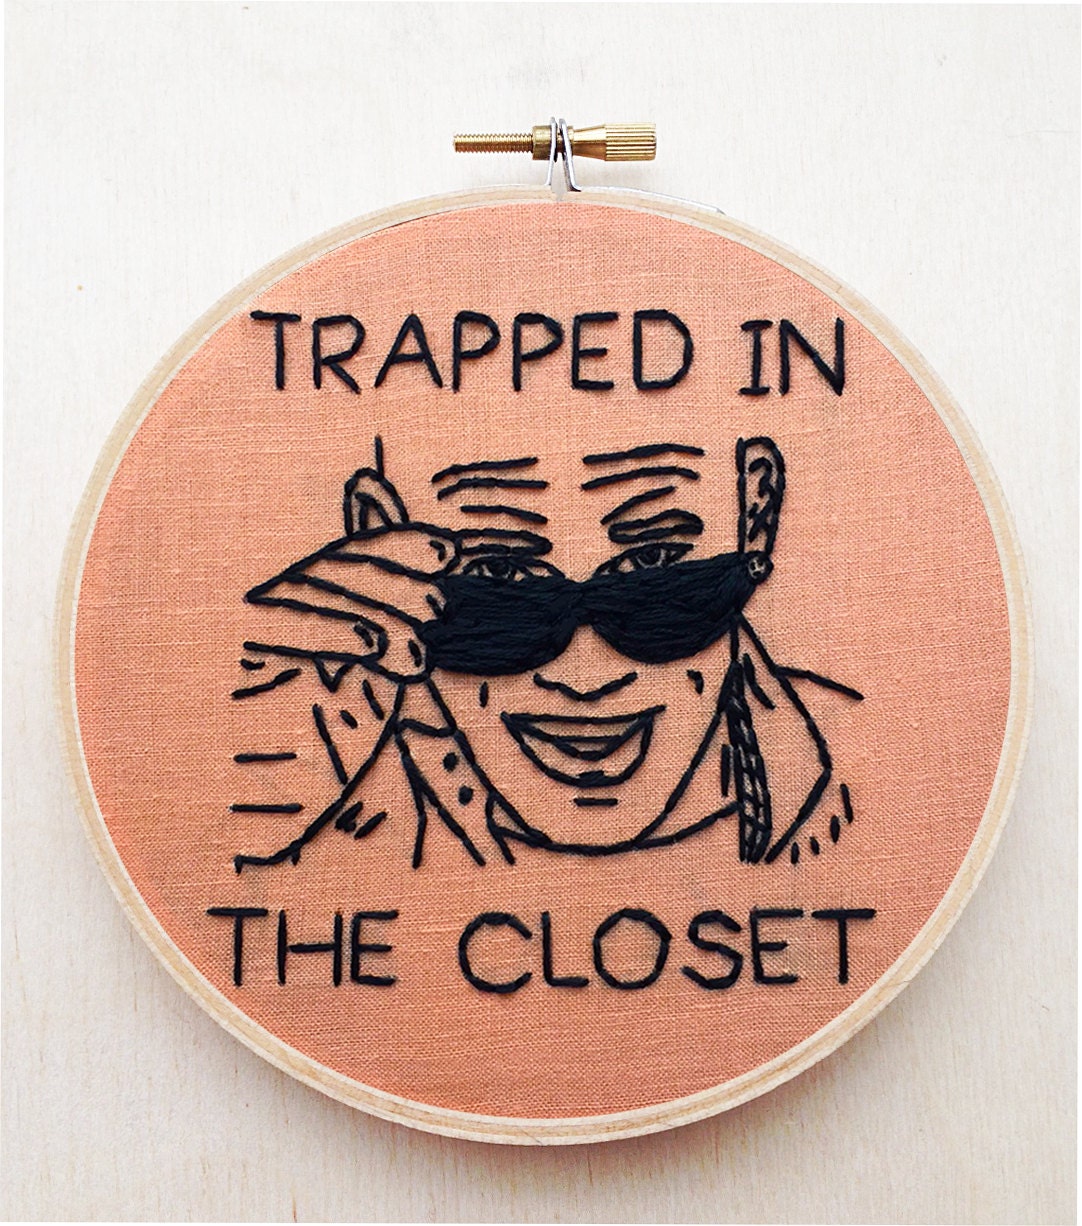 Trapped in the closet lyrics 4